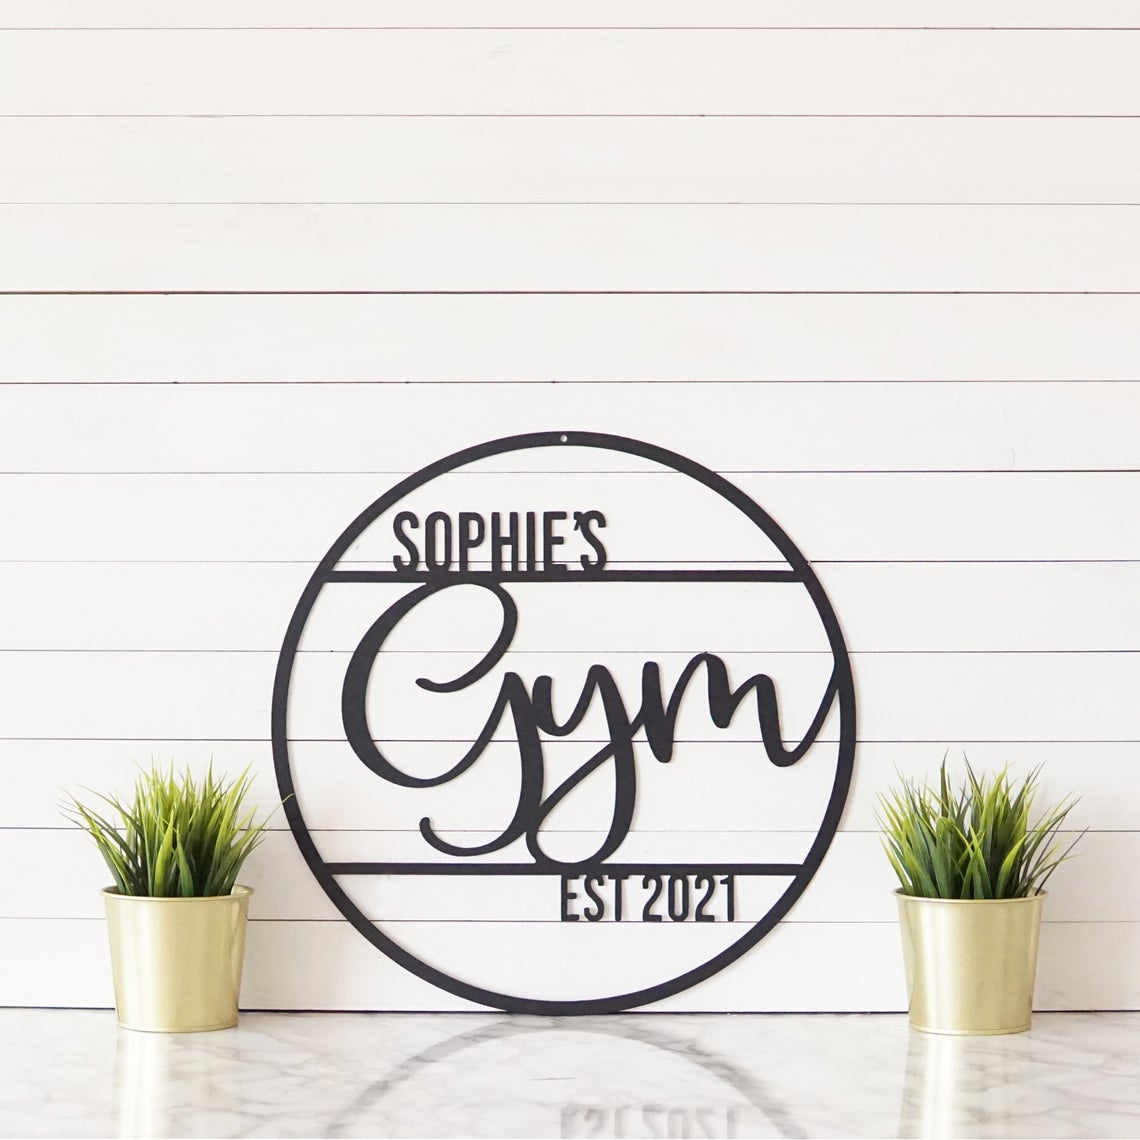 Personalized Home Gym SignCustom Home Gym Sign | Workout Room Sign | Gym Signs For Home Gym | Gift For Gym Lovers | Fitness Gifts | Workout Gifts | Metal Sign